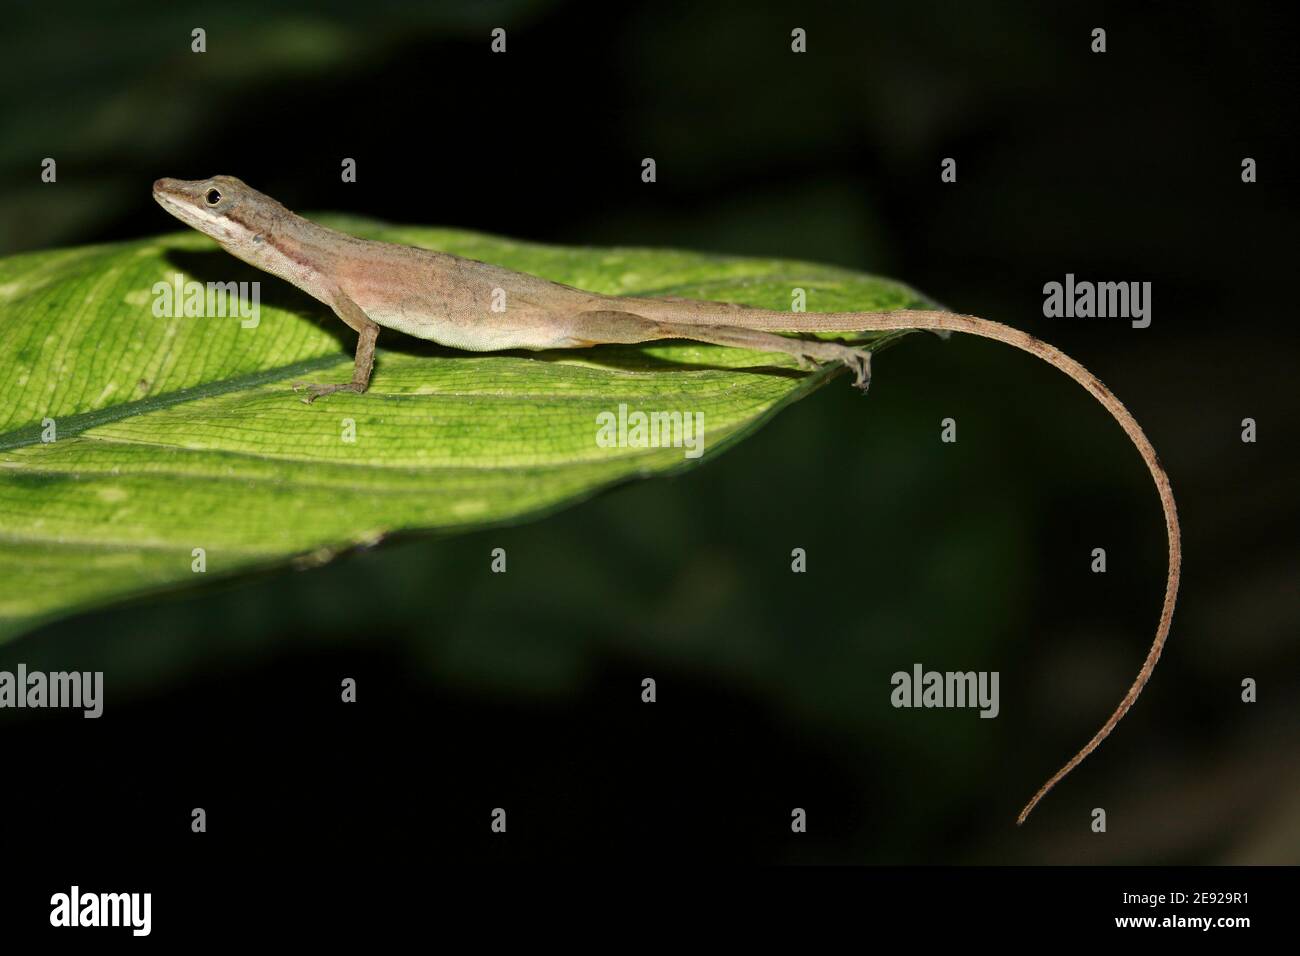 Anole Lizard - Border Anole (a.k.a. Slender Anole) Anolis limifrons at Night, Costa Rica Stock Photo